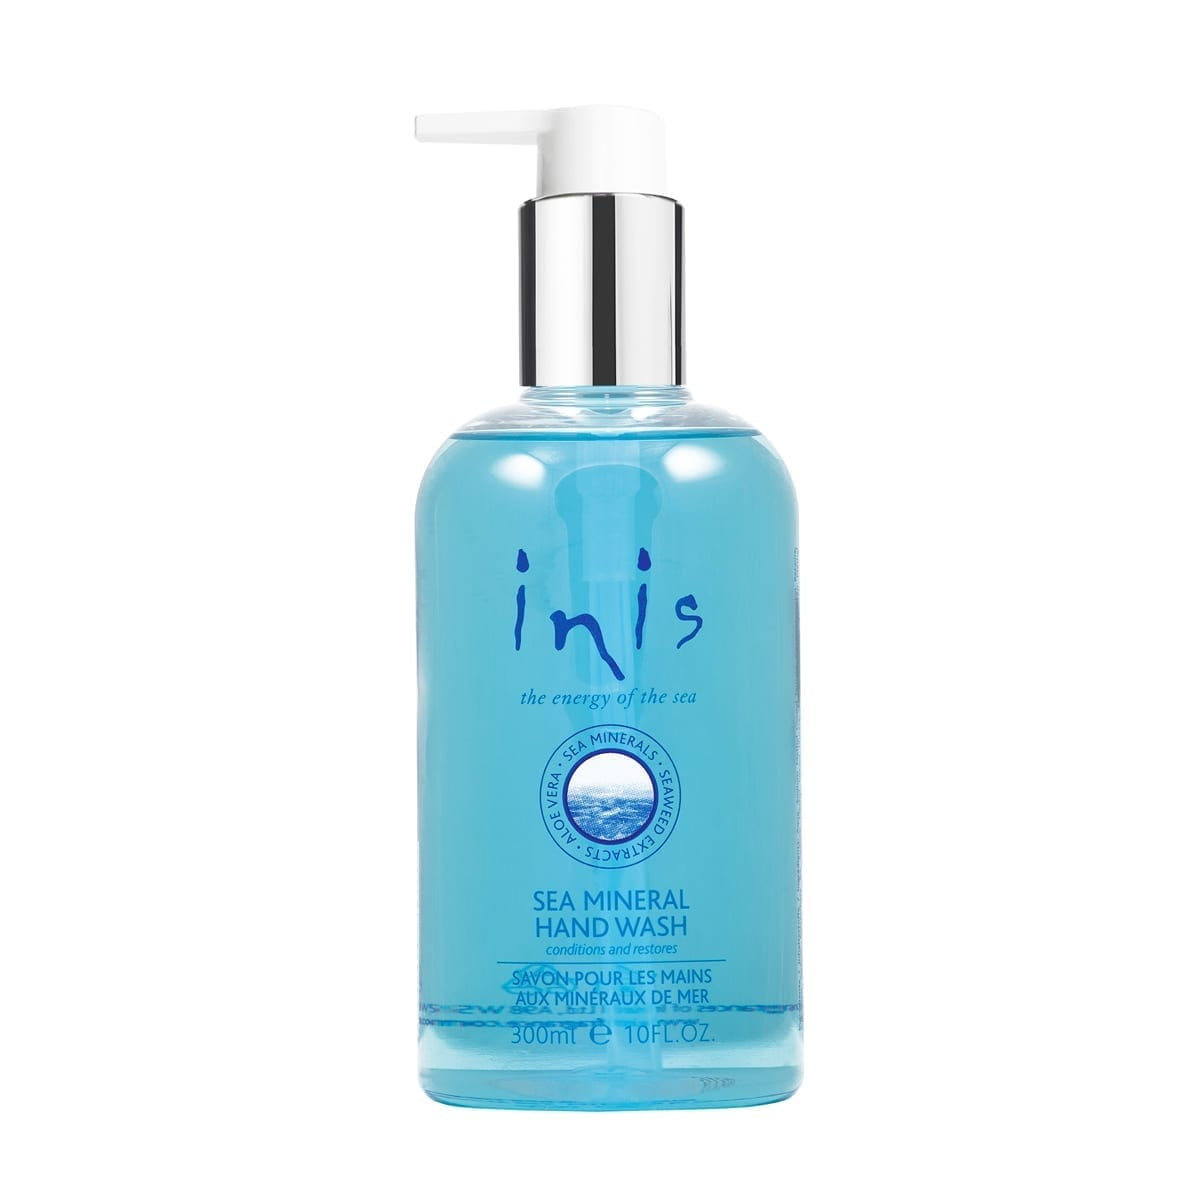 Buy Inis Sea Mineral Hand Wash 300ml at Southend stockist Under the Sun